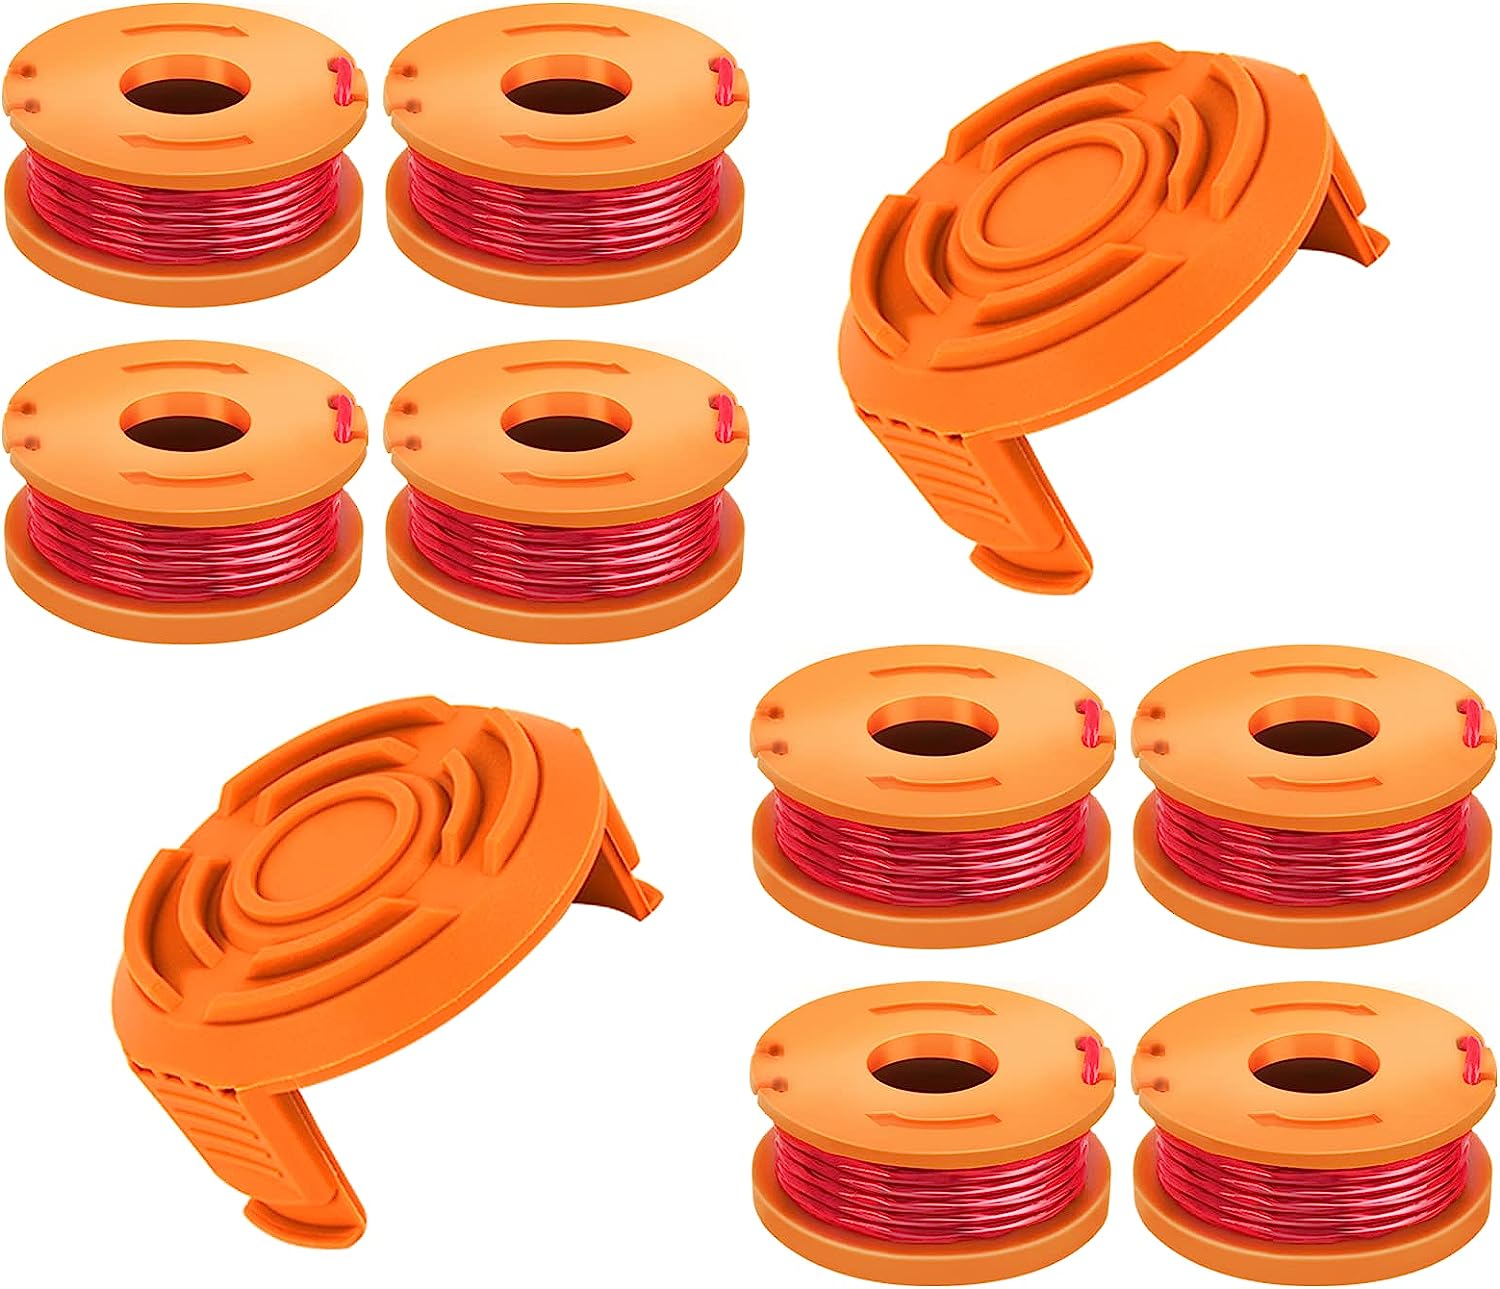 10 Pcs WA0010 Replacement Trimmer Spool for Worx,0.065 [...]